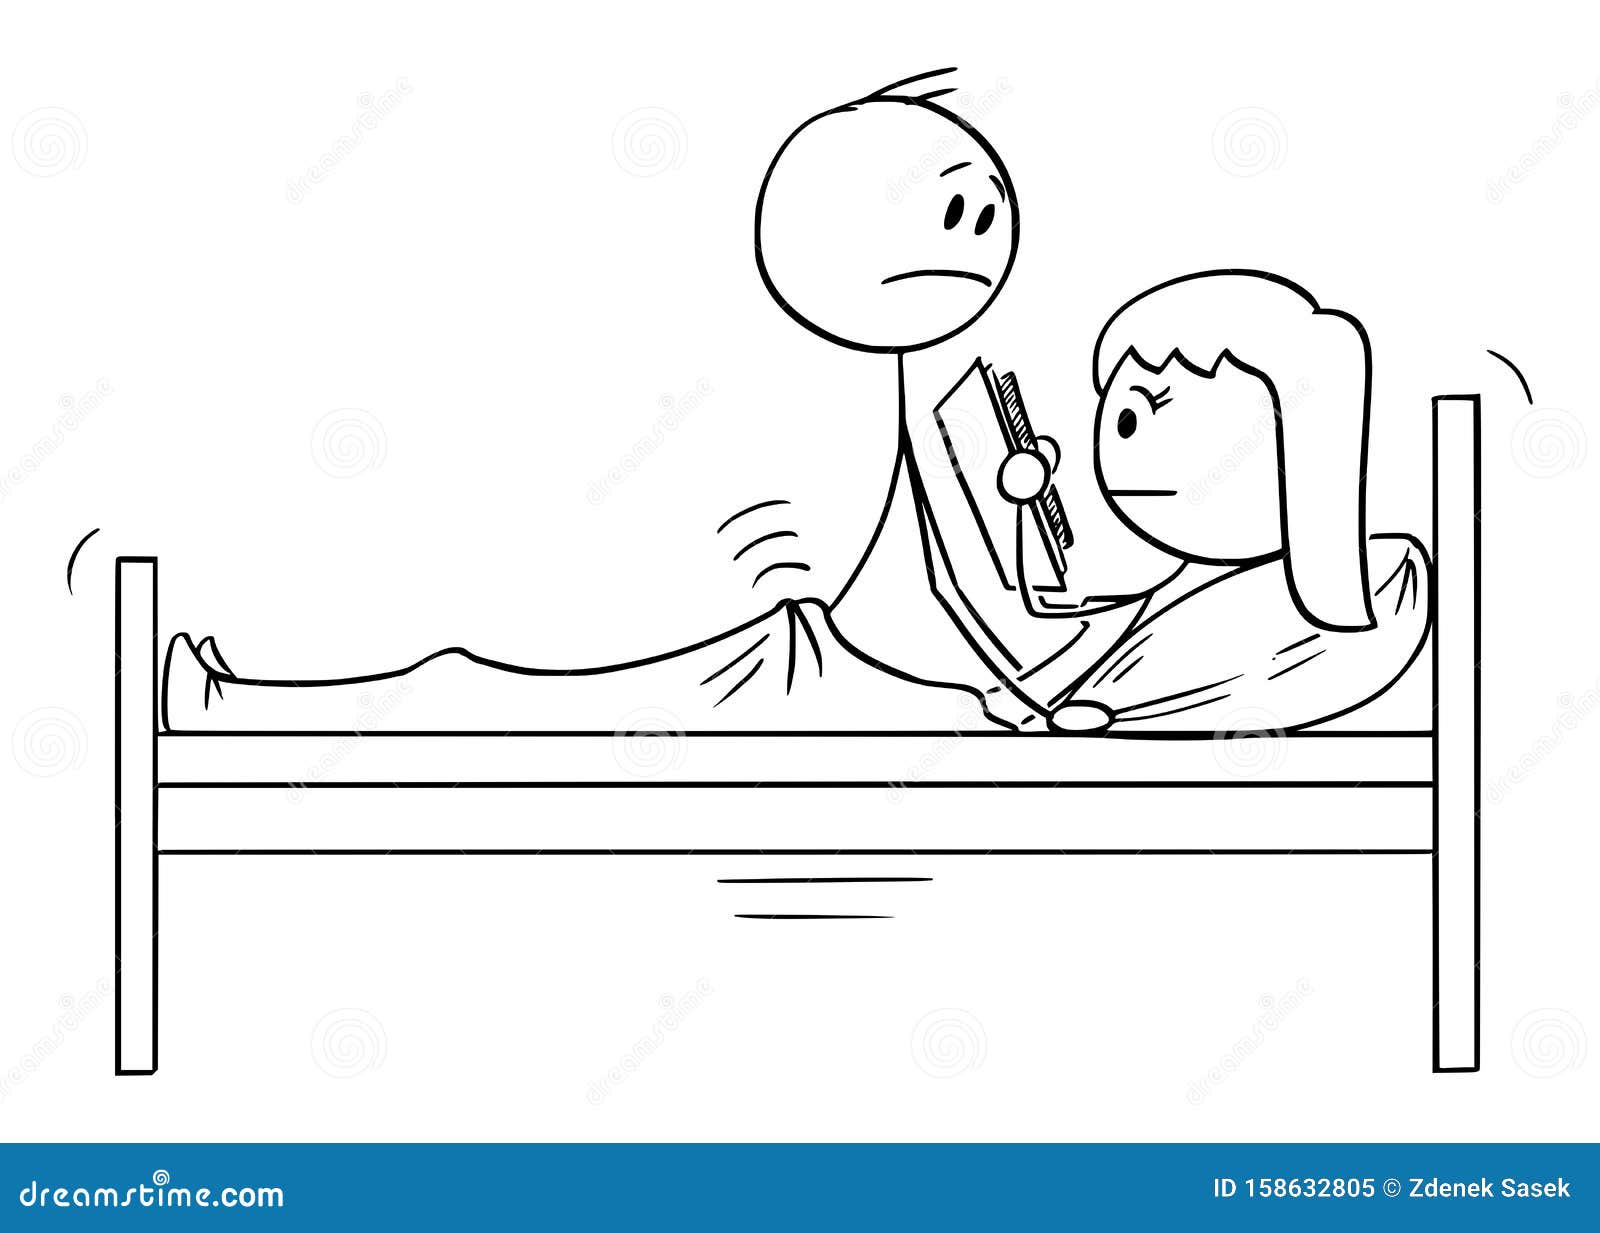 Vector Cartoon Illustration of Heterosexual Couple of Man and Woman Having  Sex or Sexual Intercourse while Frigid Woman Stock Vector - Illustration of  person, cold: 158632805